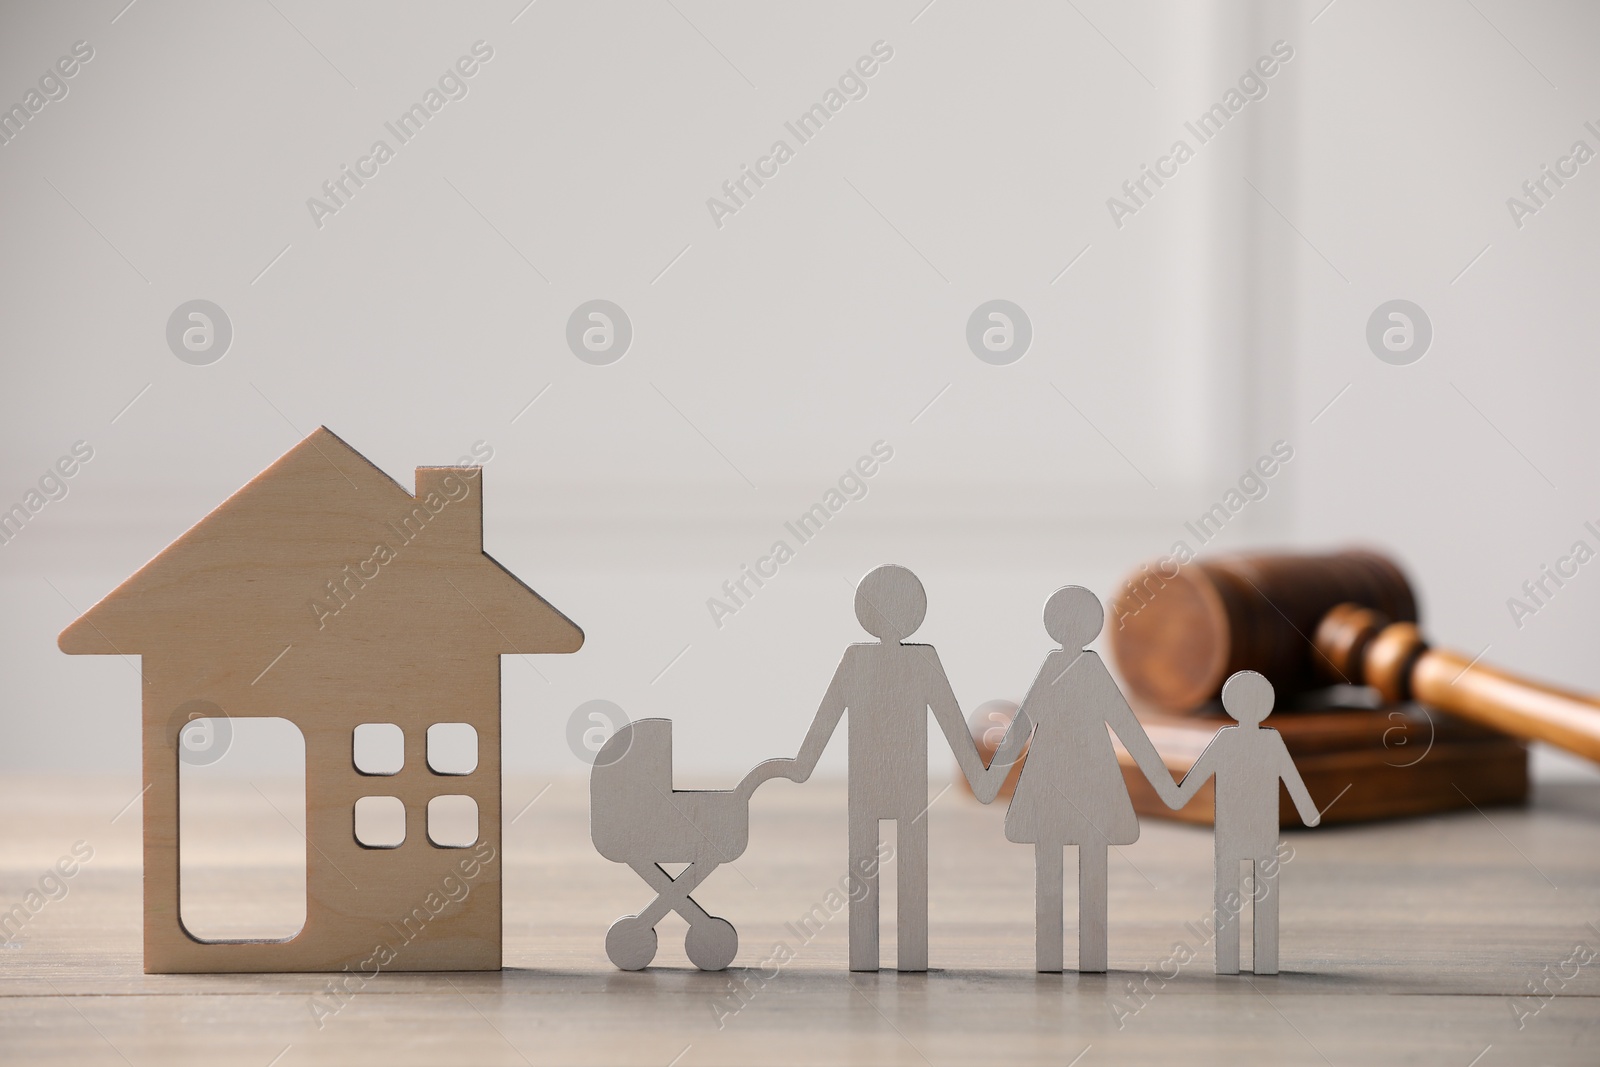 Photo of Family law. Figure of parents with children, house model and gavel on wooden table, space for text